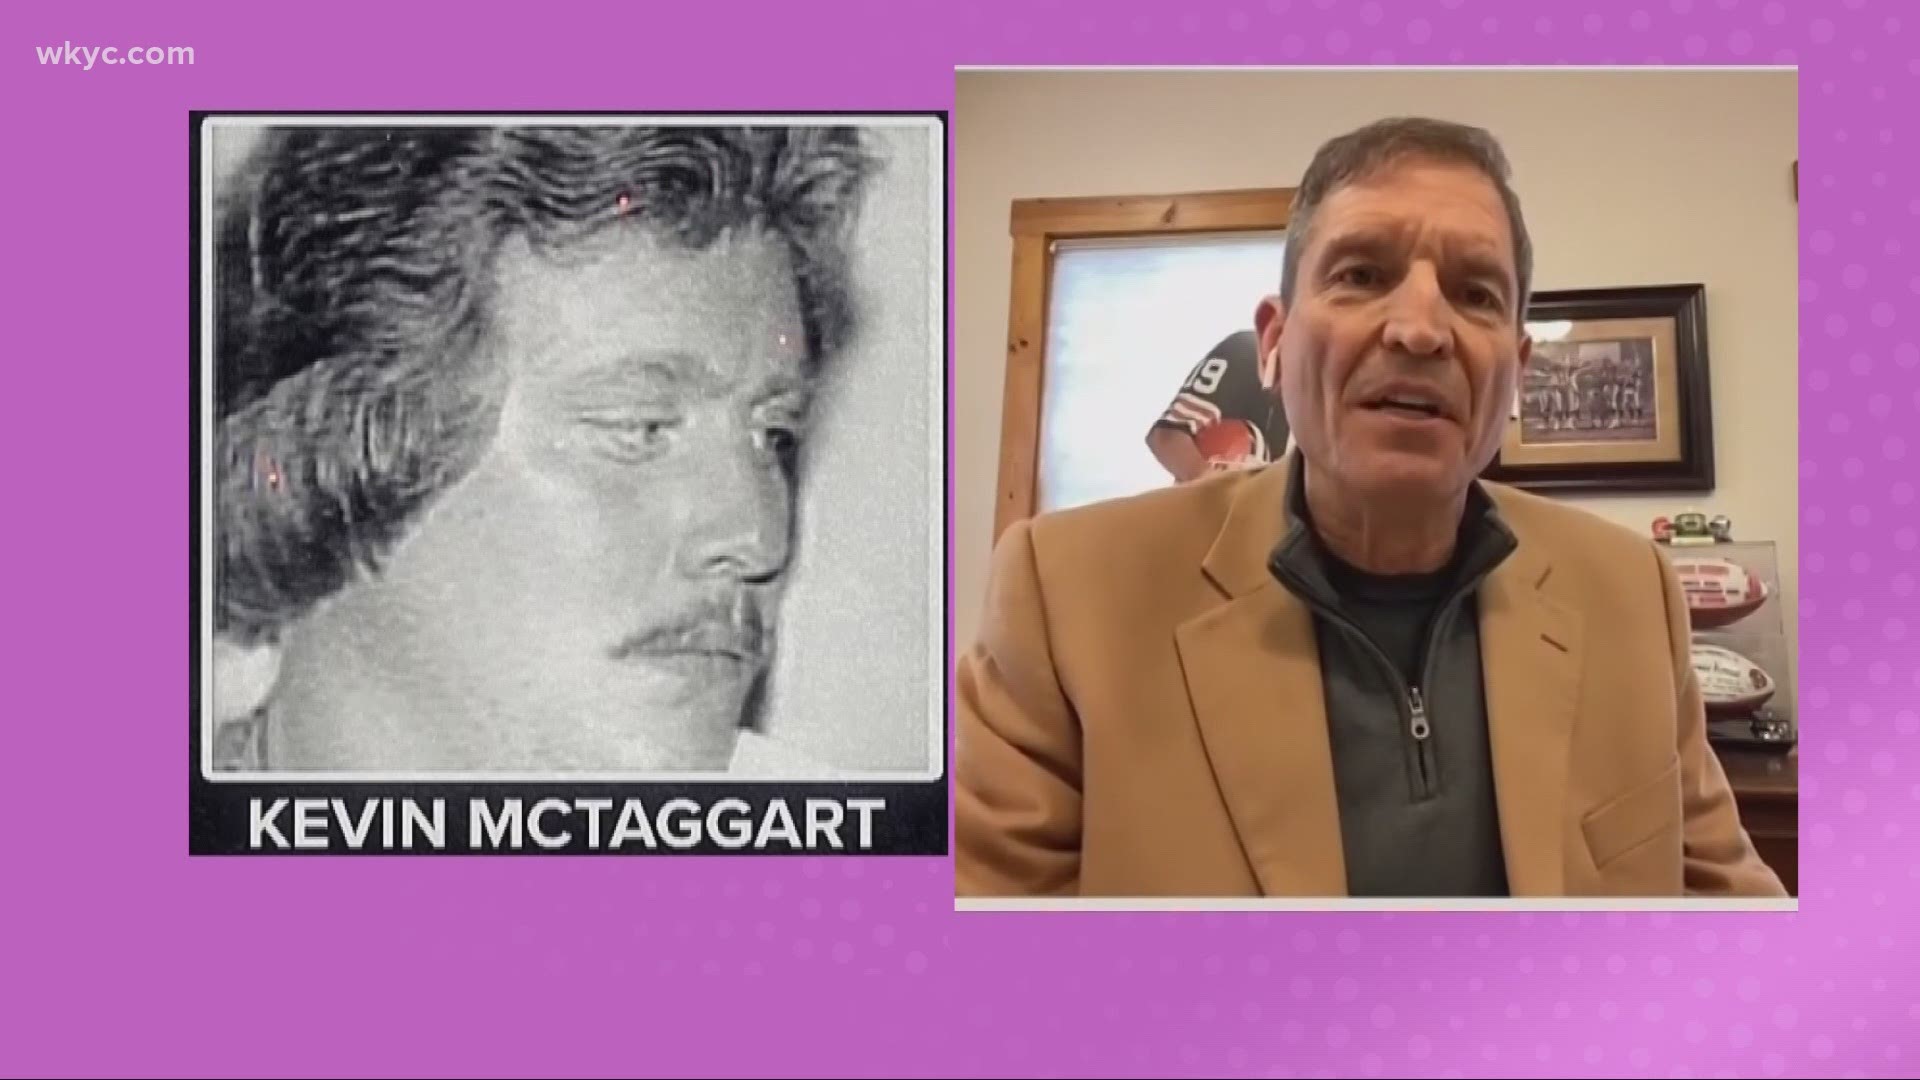 Kosar says Kevin McTaggart is a changed man after 38 years in prison.  Kosar believes McTaggart deserves a second chance despite killings, drug dealing for mob.